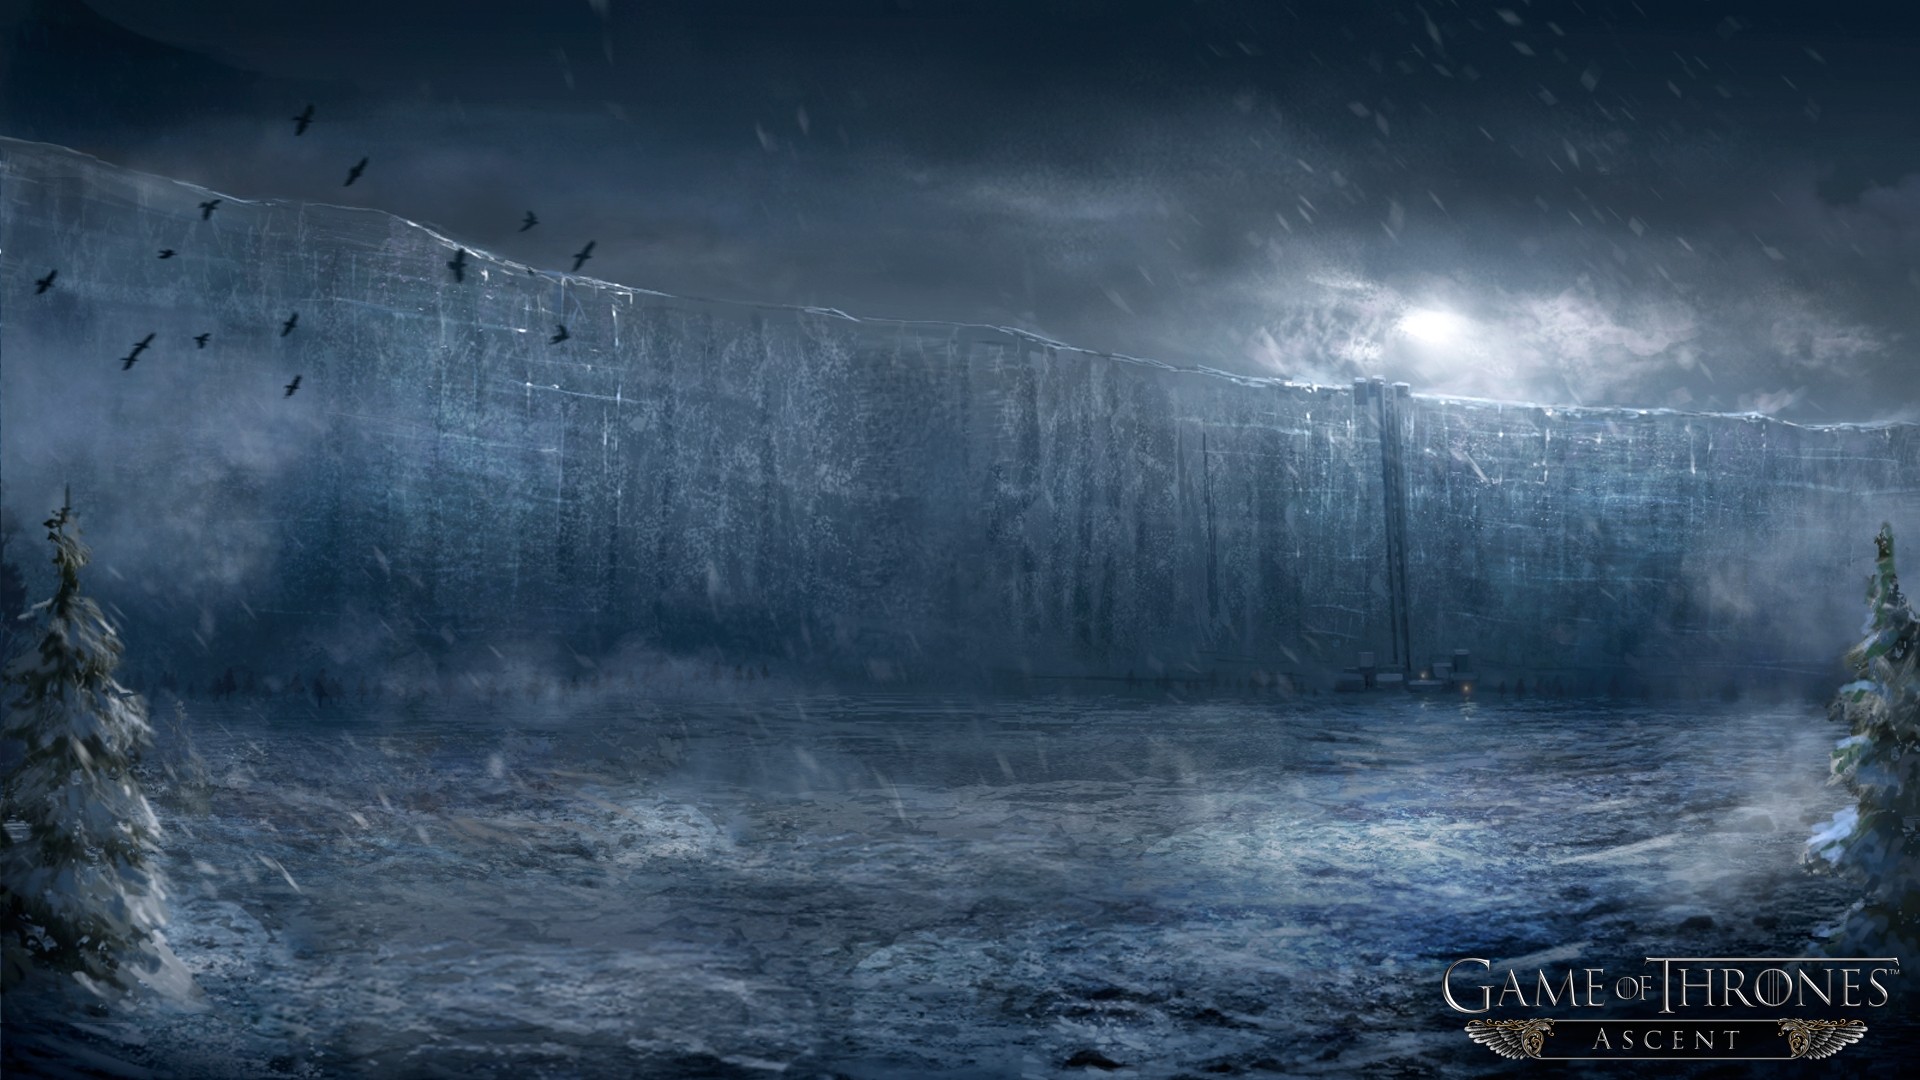  Game  of Thrones  wallpaper  1920x1080   Download free cool 